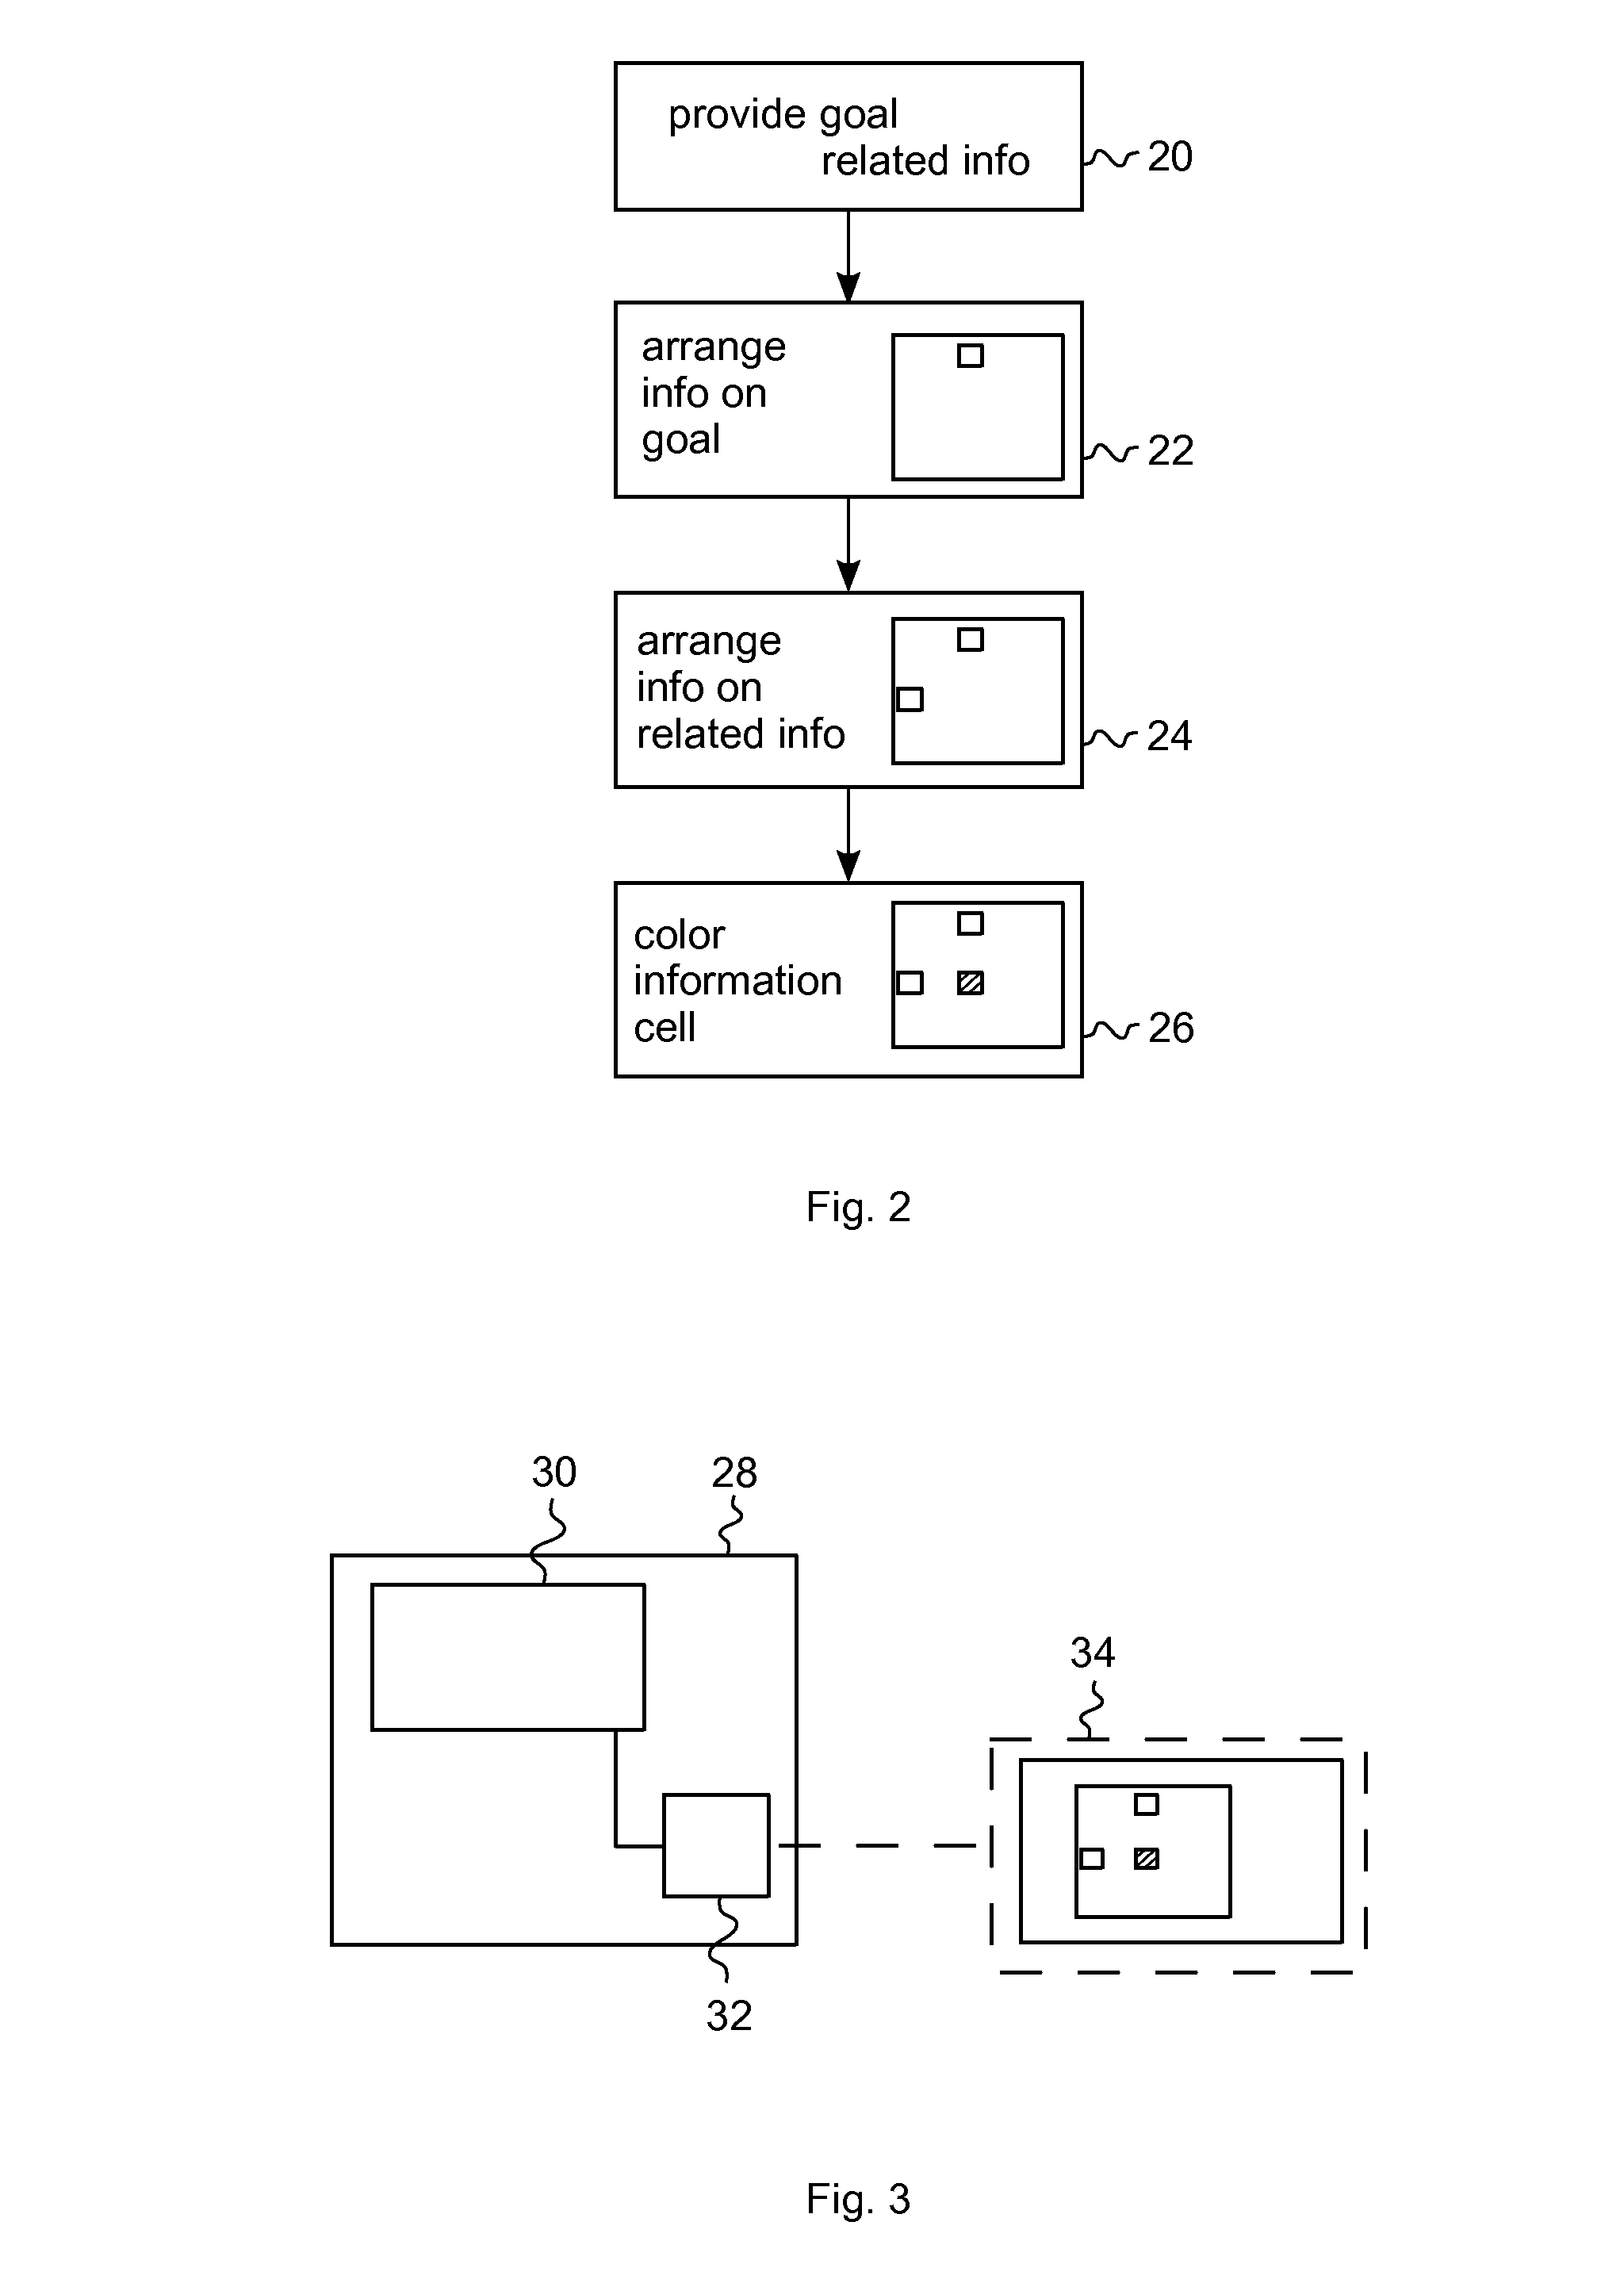 Method and apparatus for increasing the information density in information provided on the progress of a project